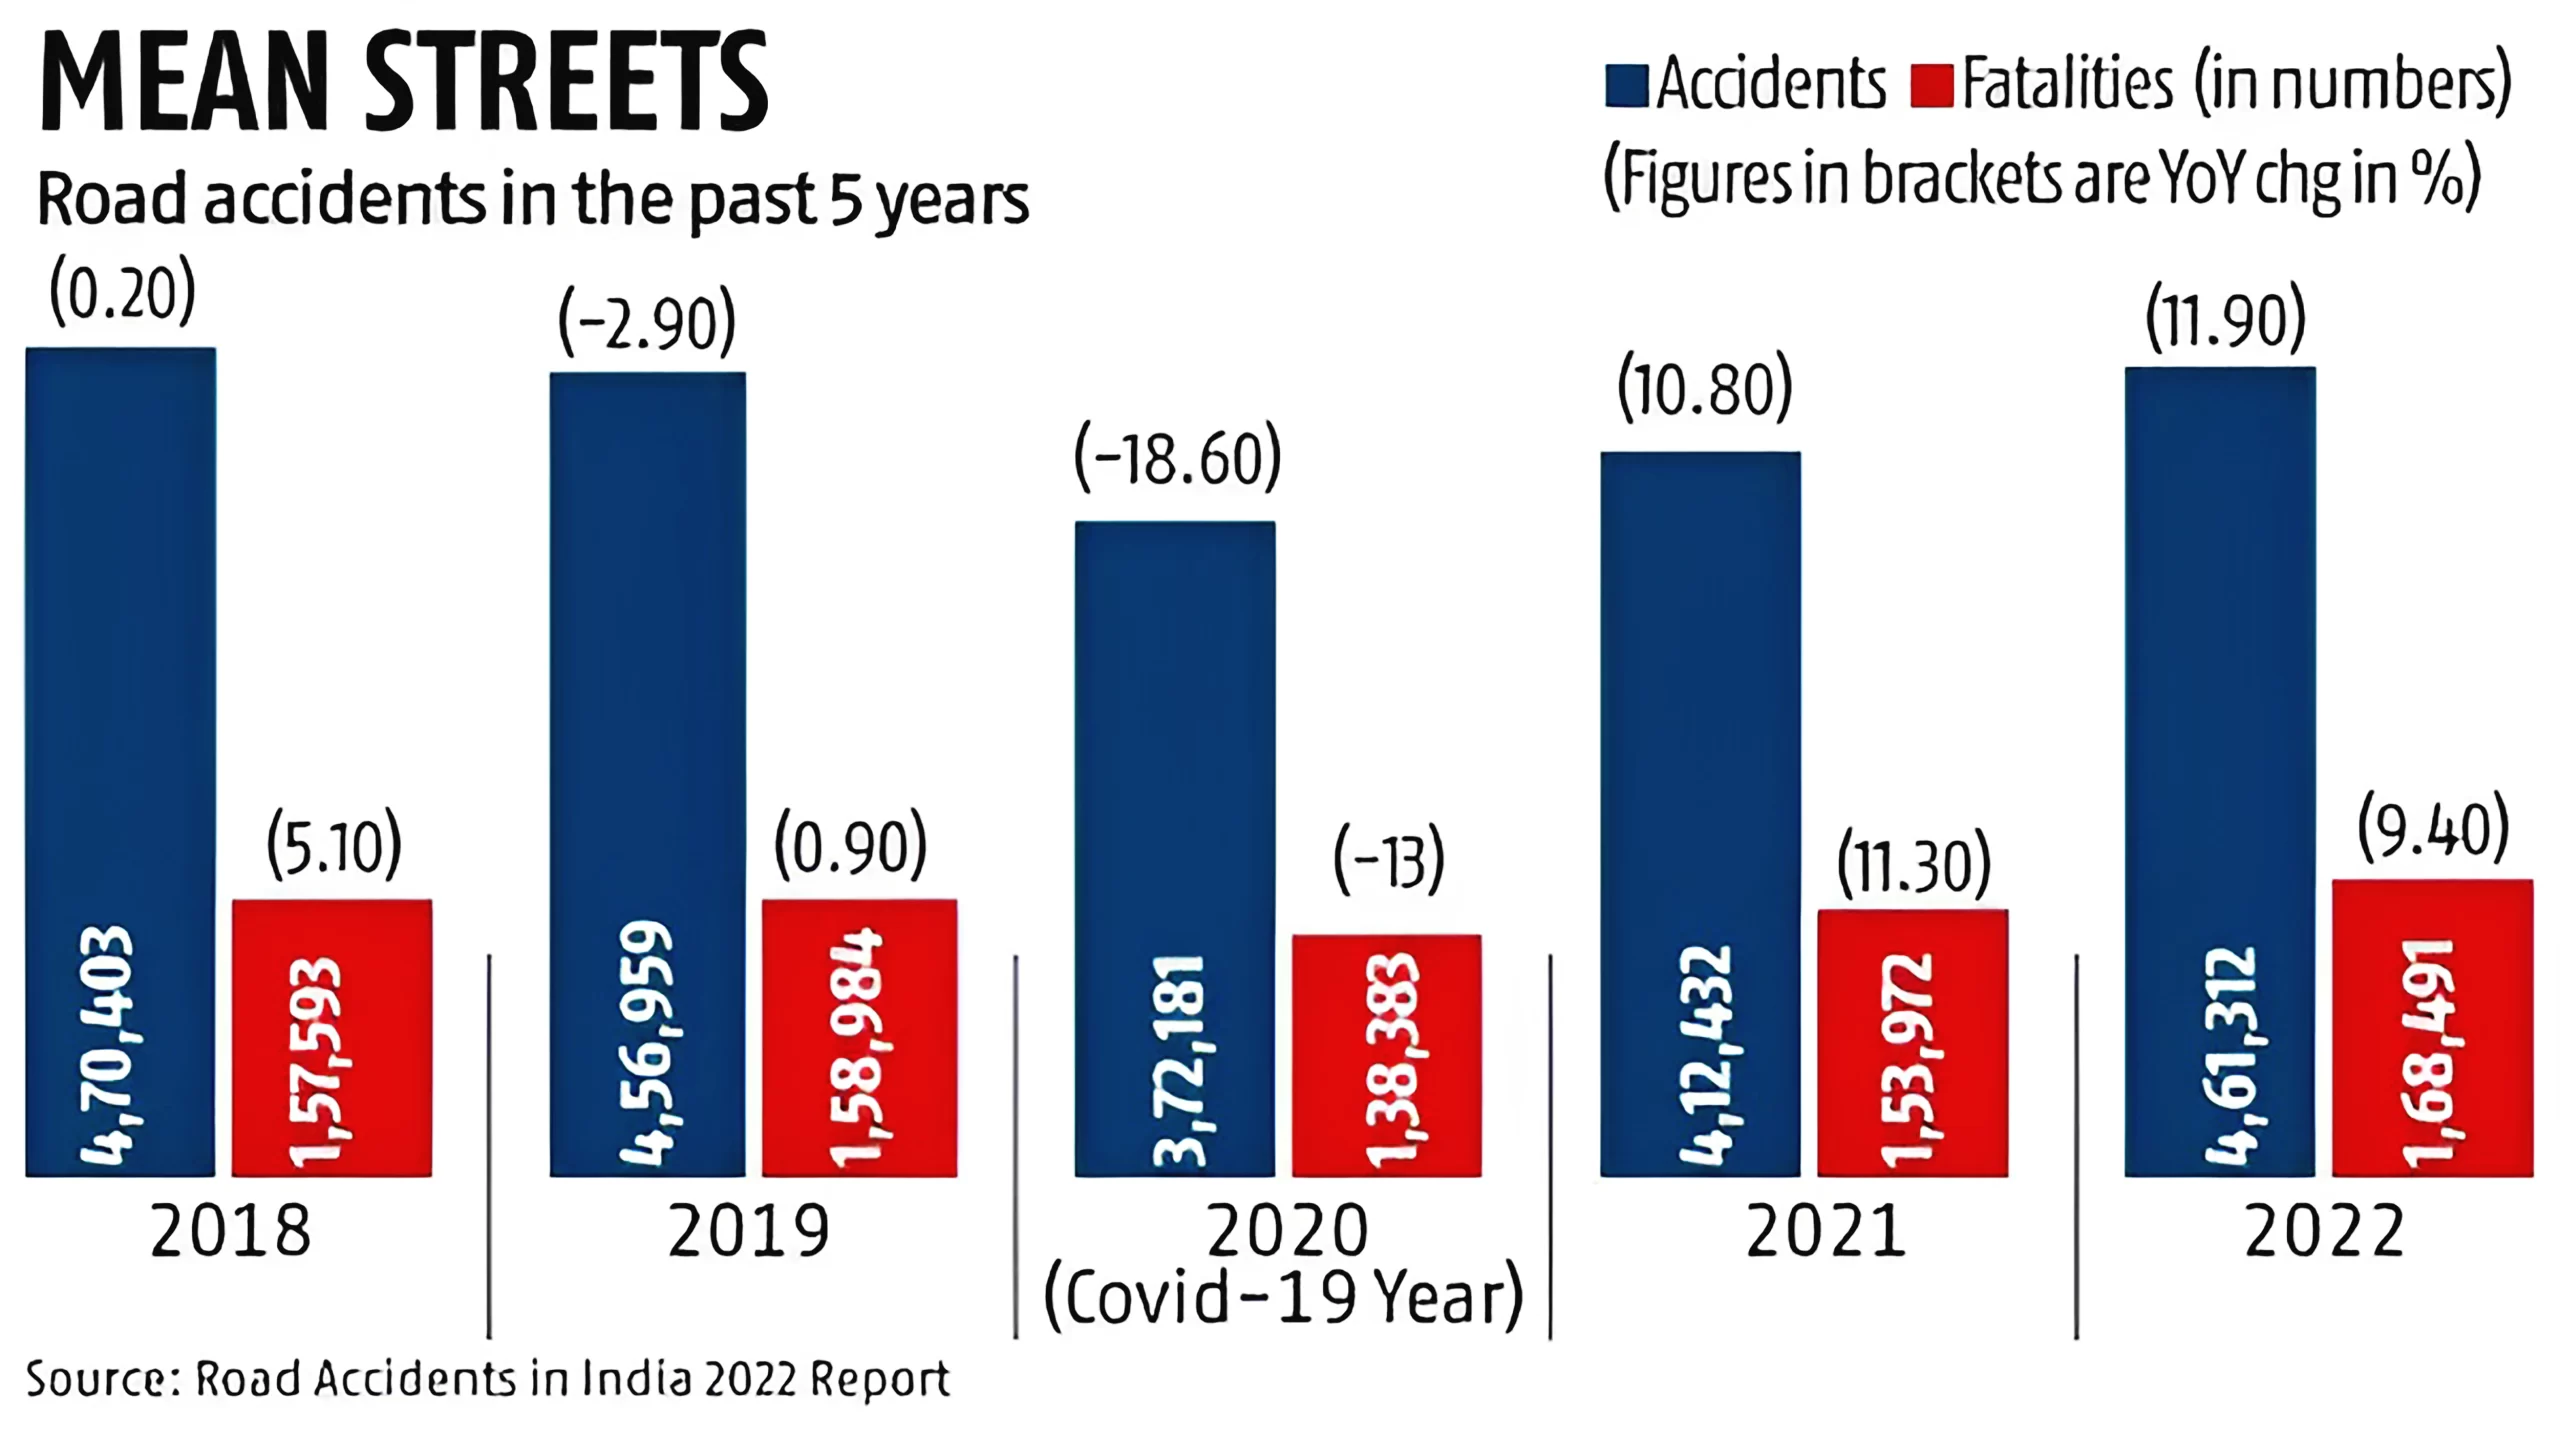 Road Accidents in India
